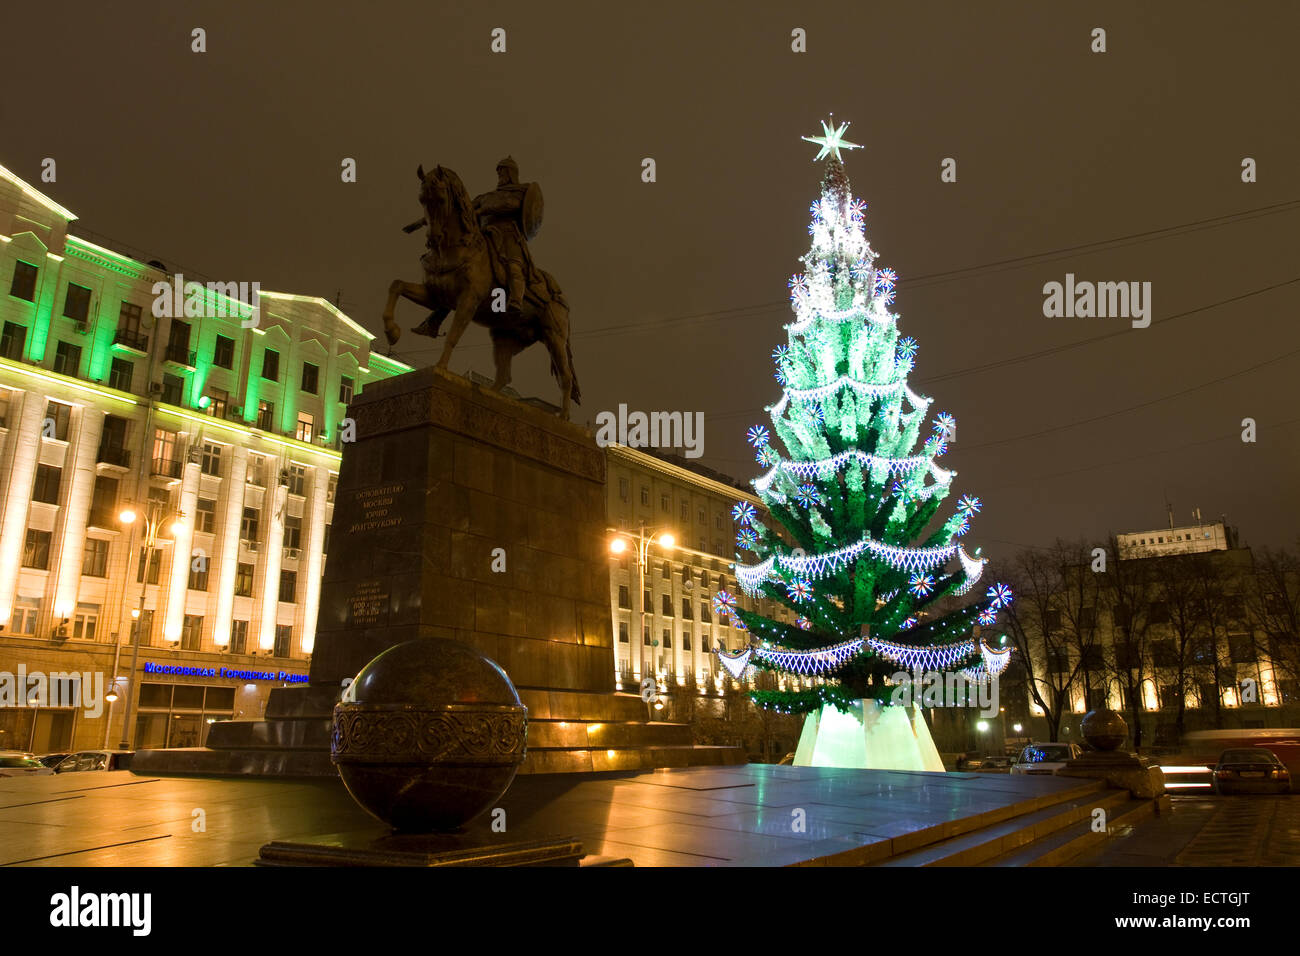 Moscow, Russia - December 15, 2011: Christmas - New Years tree near monument to prince Yury Dolgorukiy, founder of the city, on Stock Photo